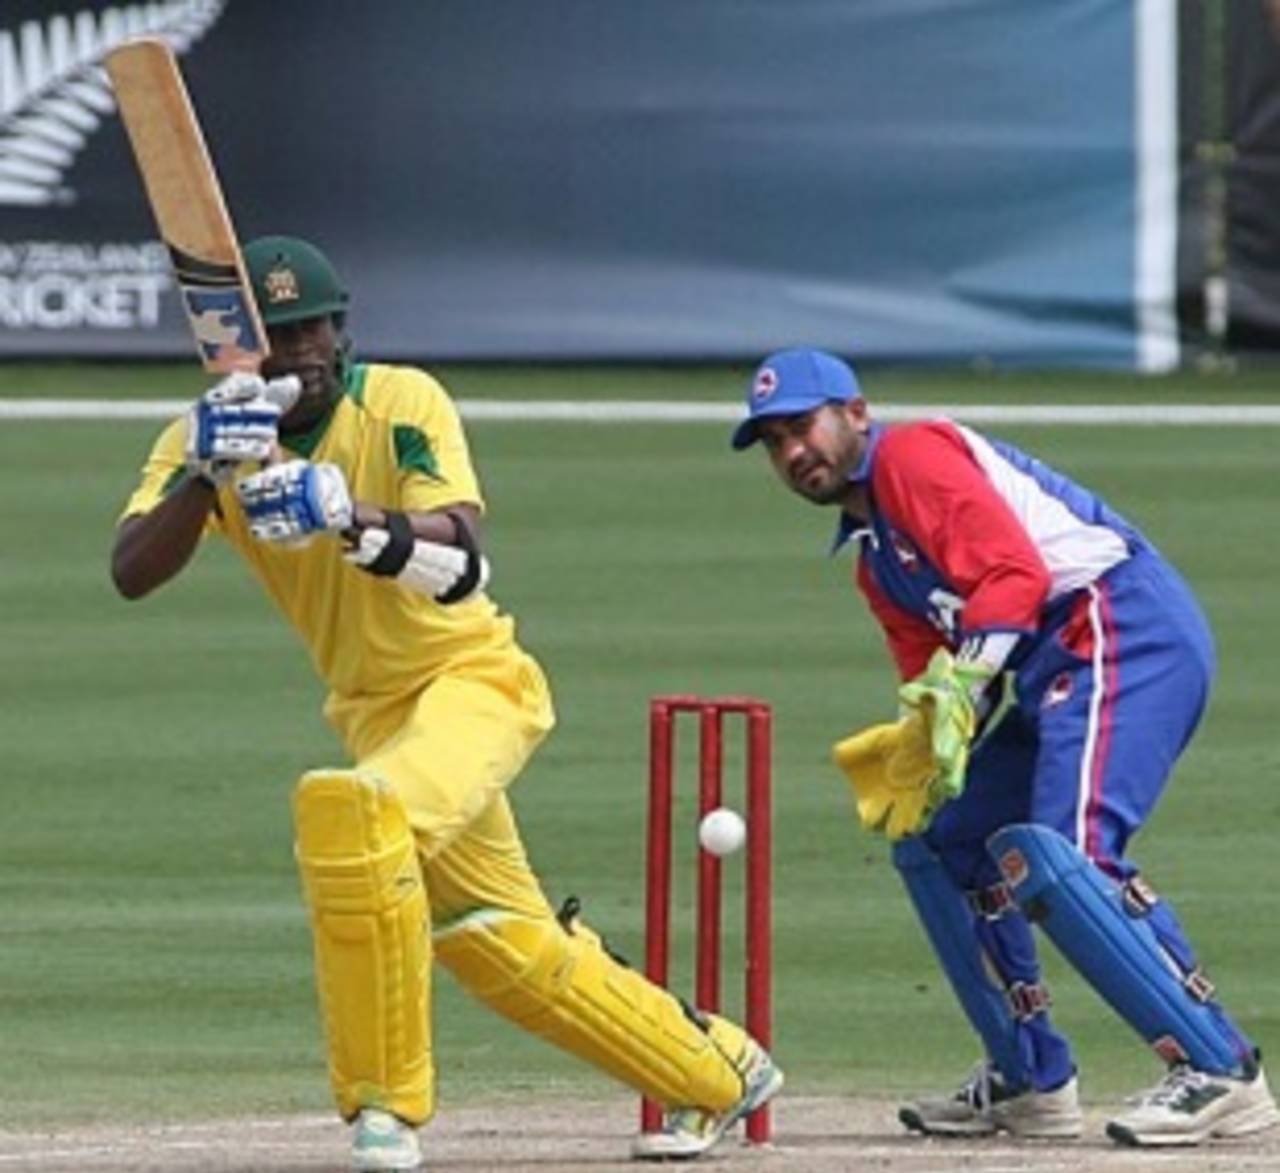 Marlon Samuels works one away through the leg side, United States of America v Jamaica, 1st match, Lauderhill, May 21, 2010 